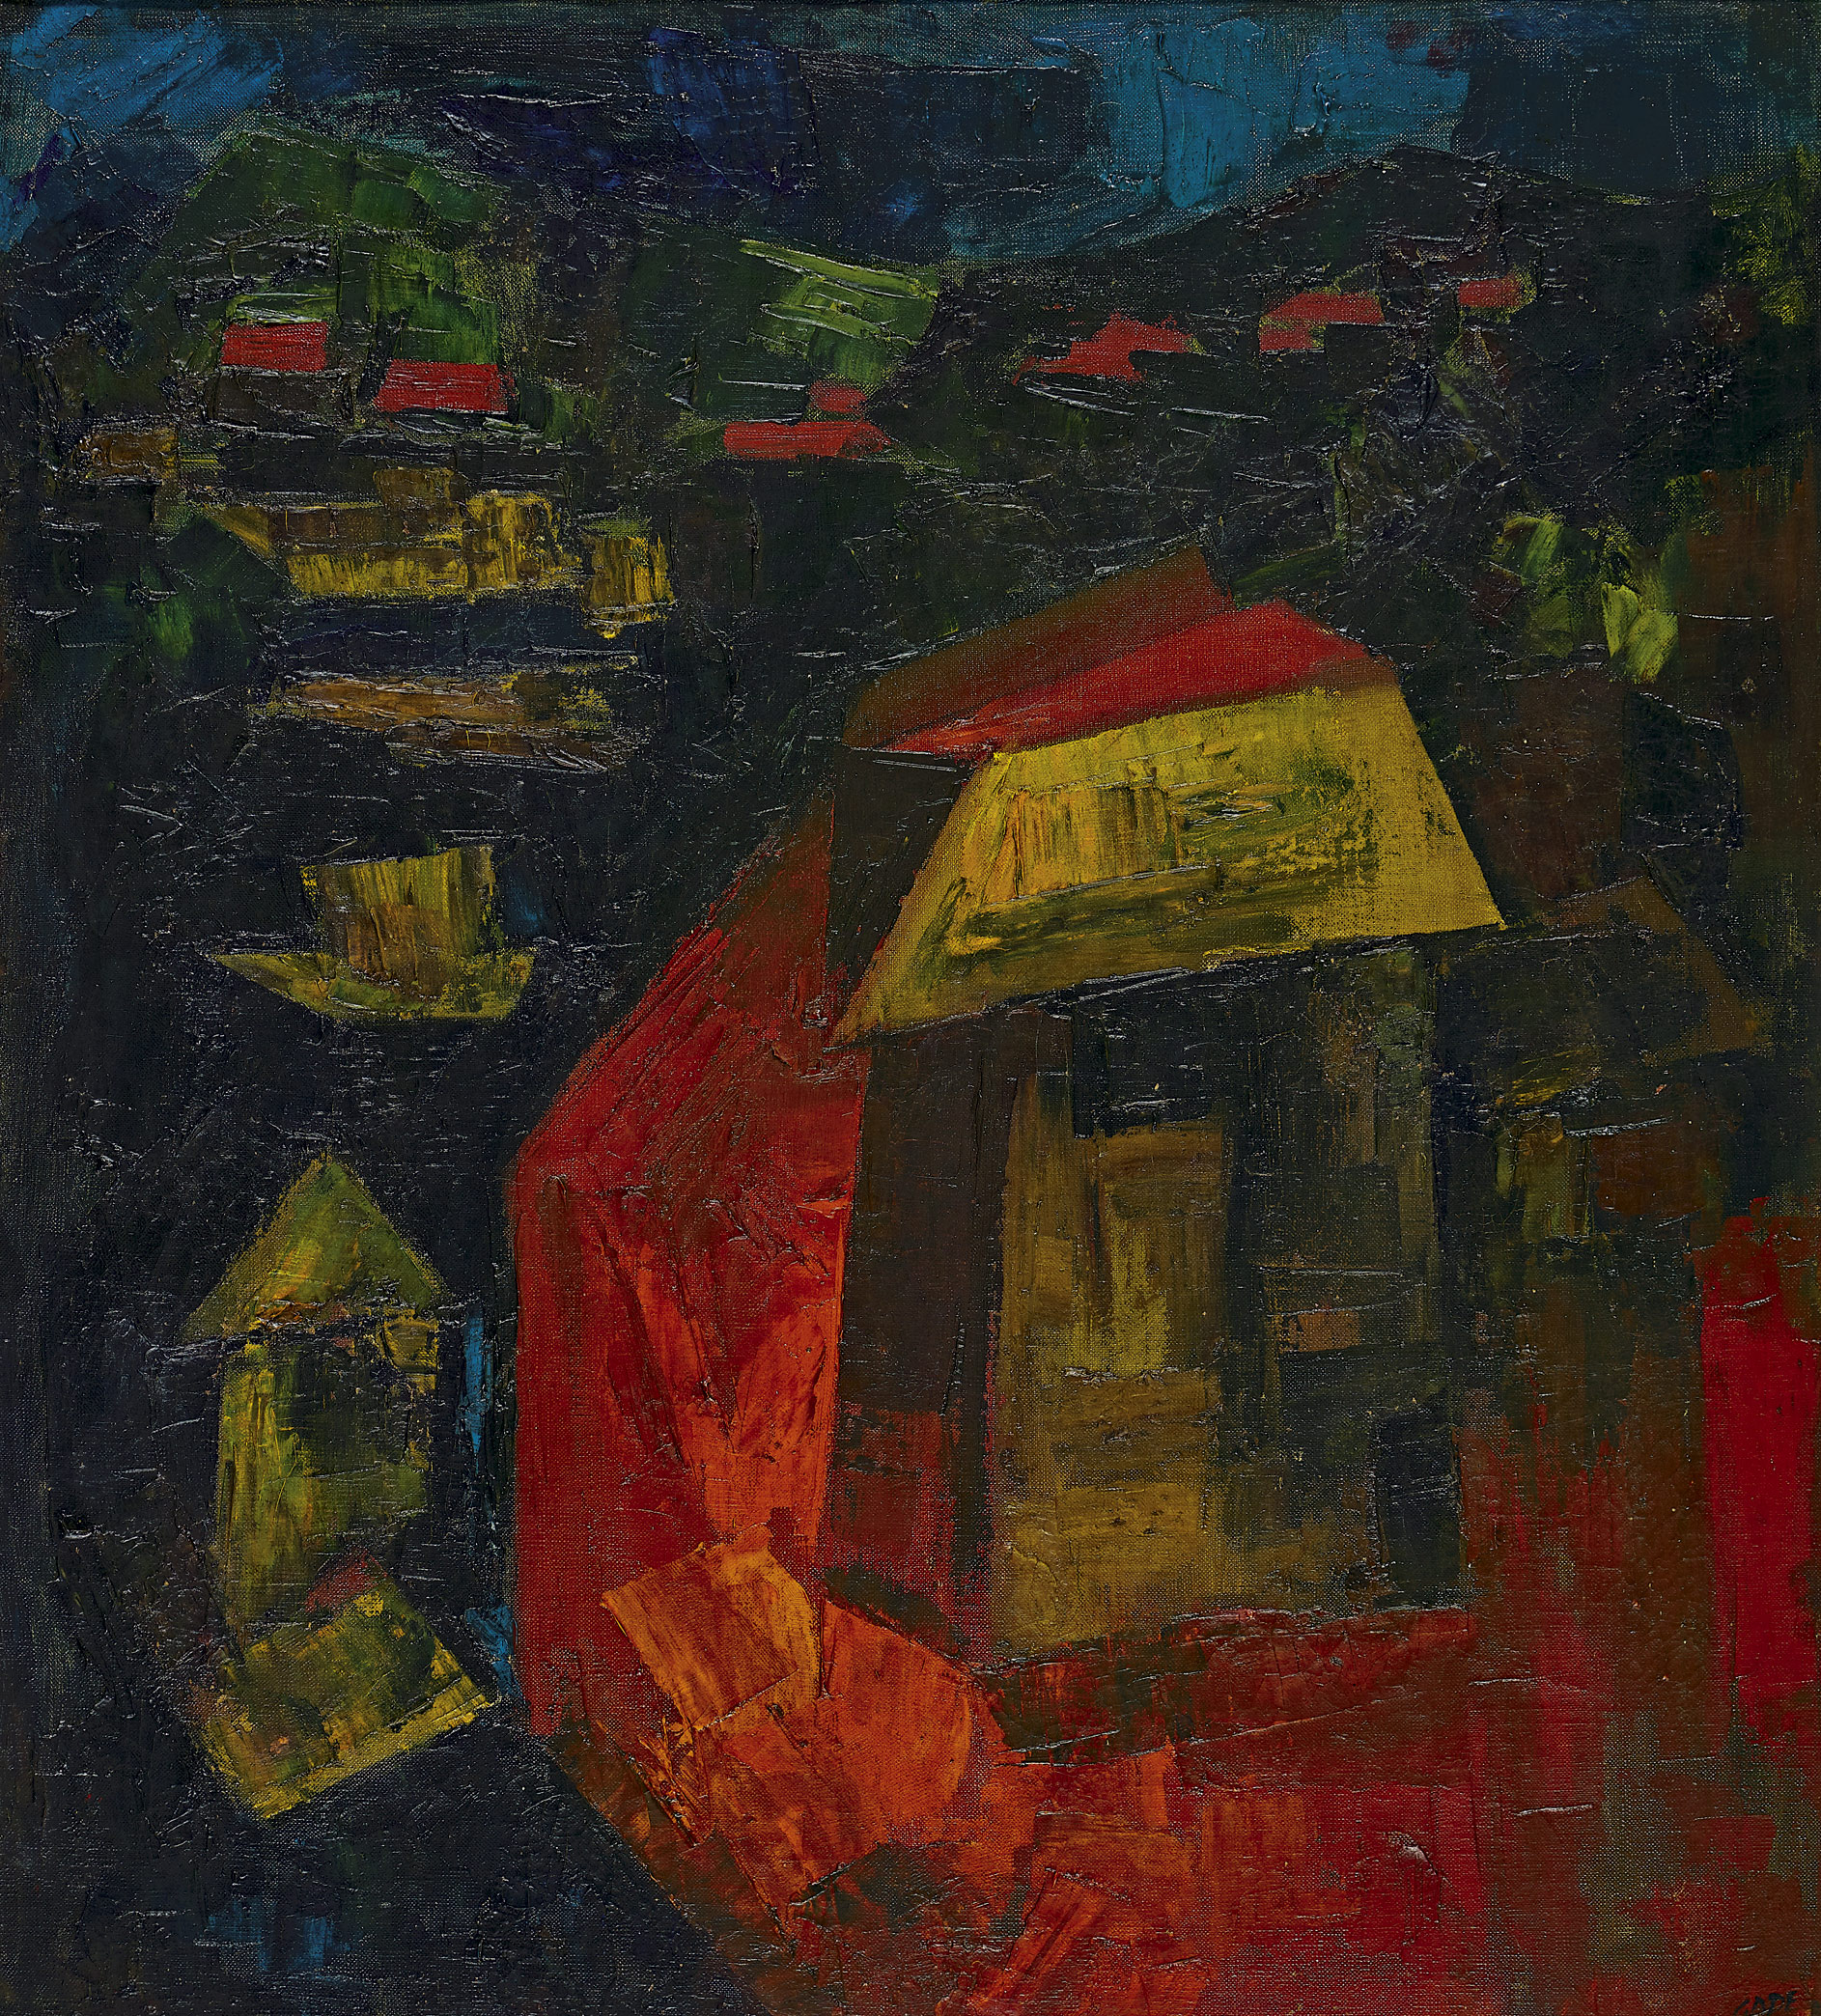  H A Gade, Untitled, circa 1950, commanded a world record-breaking price for the artist at INR 48,80,952 (US$ 68,745) at AstaGuru's Collectors Choice Auction